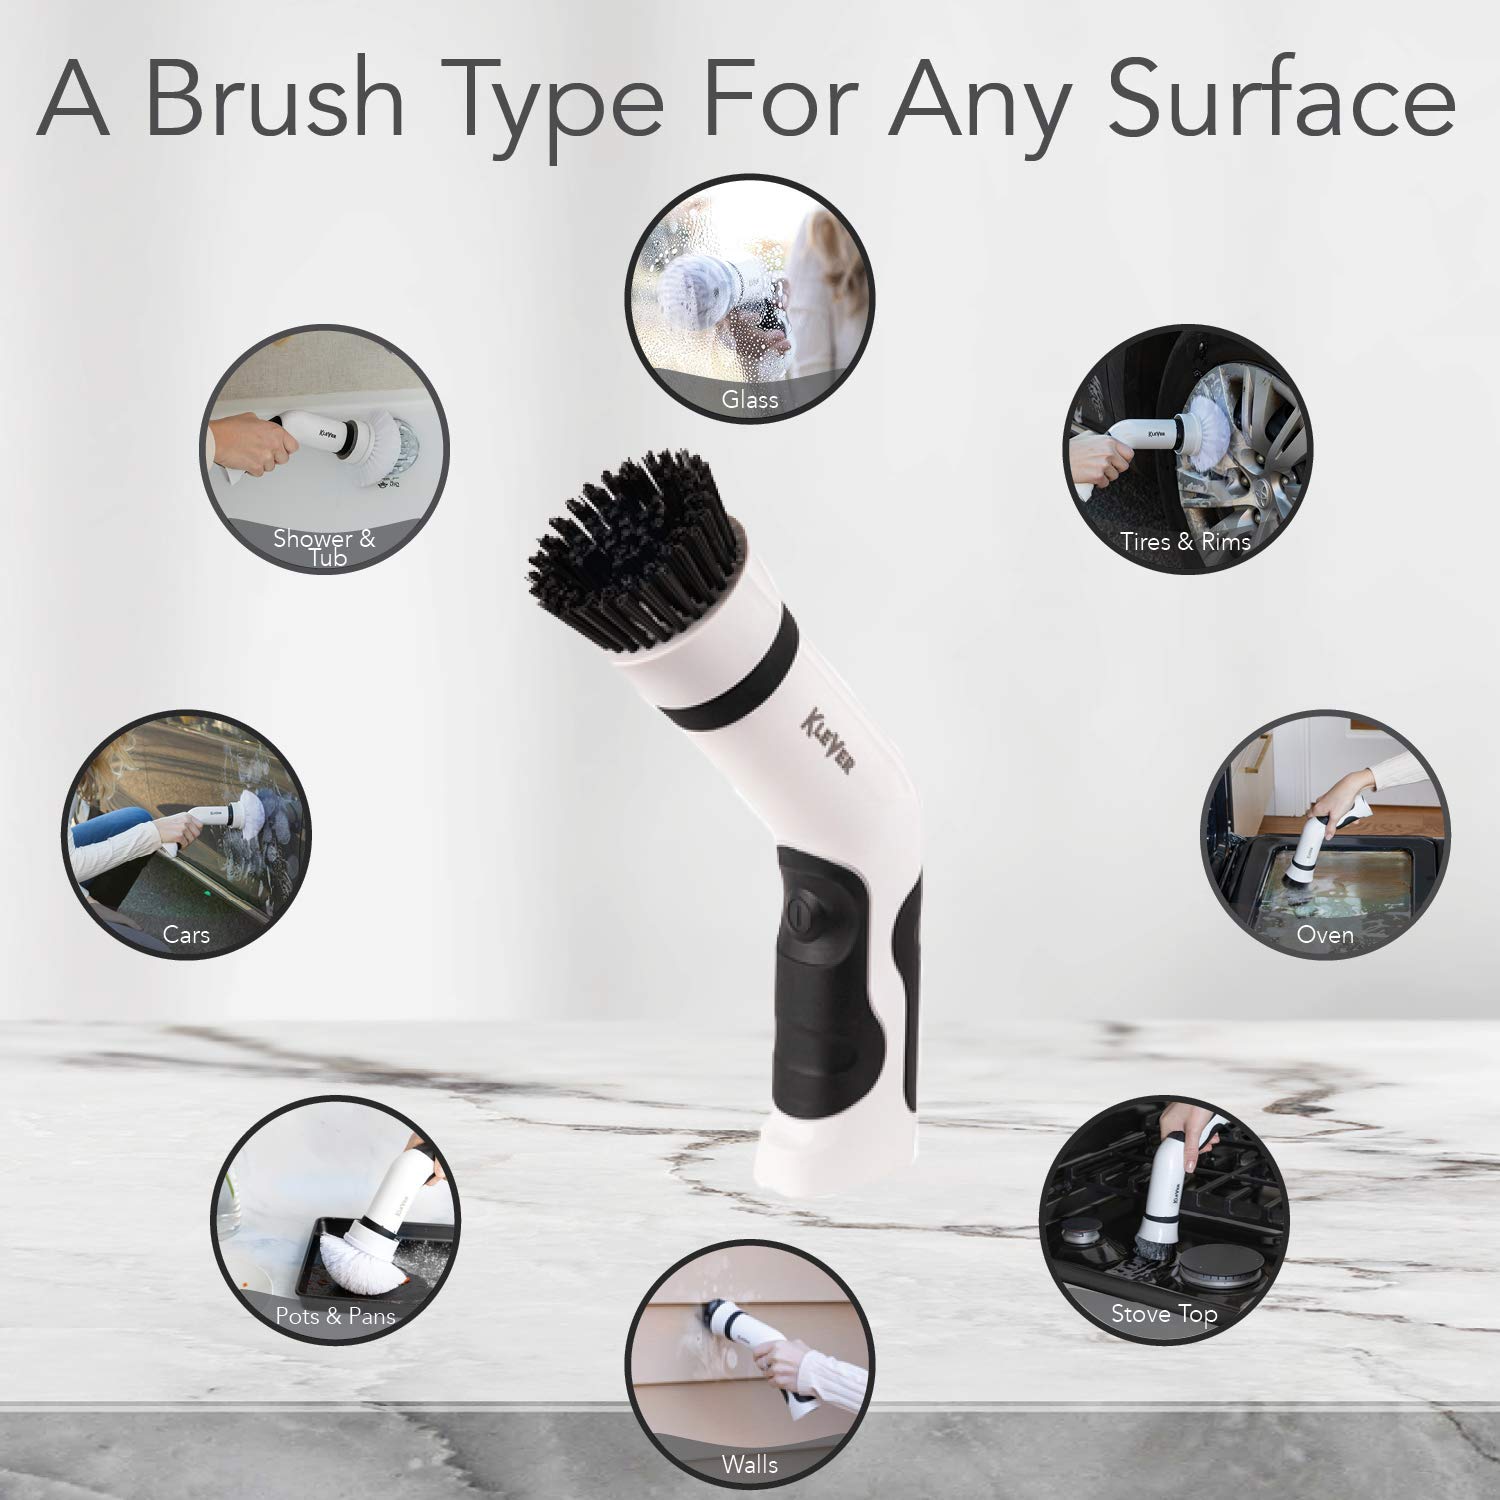 Klever Electric Spin Power Scrubber-The Expert Kitchen & Bathroom Cleaner | Includes 8 Versatile Scrub Brushes | Cordless, Rechargeable, & Lightweight